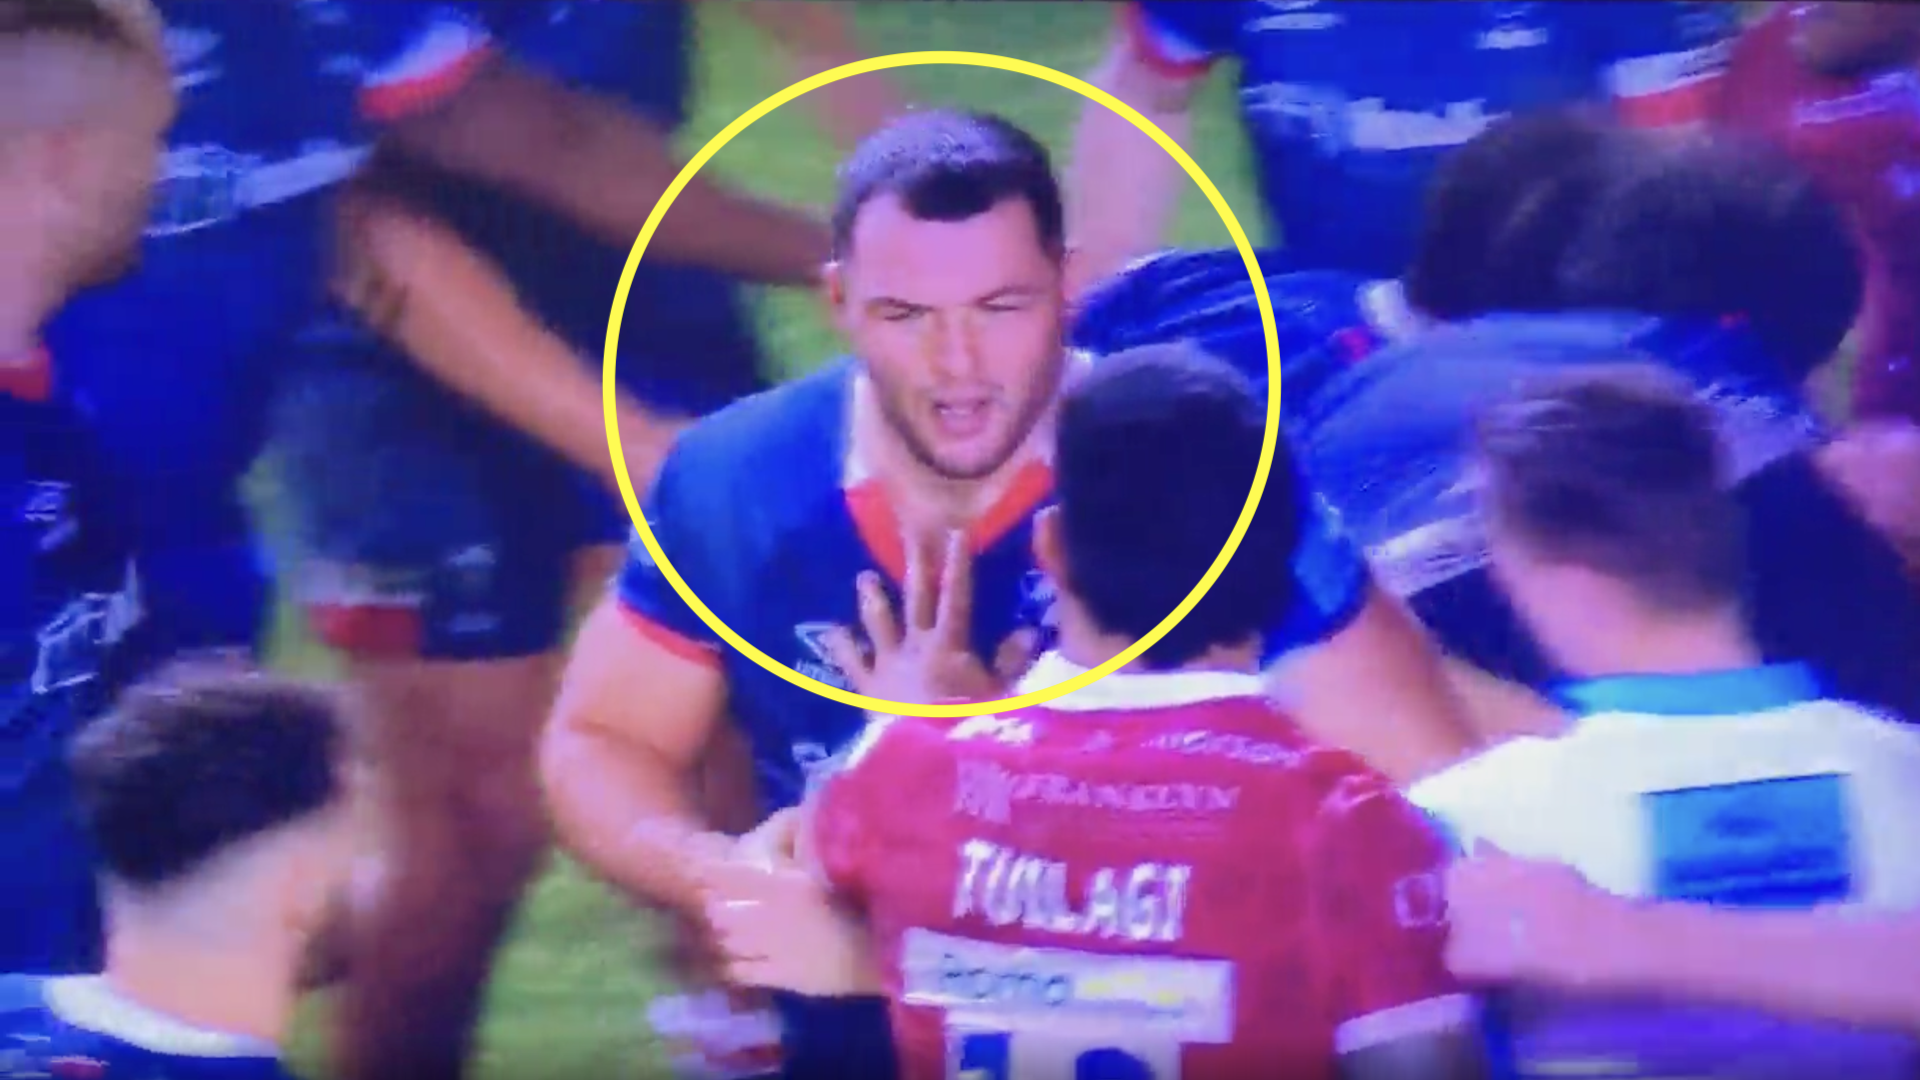 Brawl erupts after Ellis Genge's extremely dubious tackle on England teammate